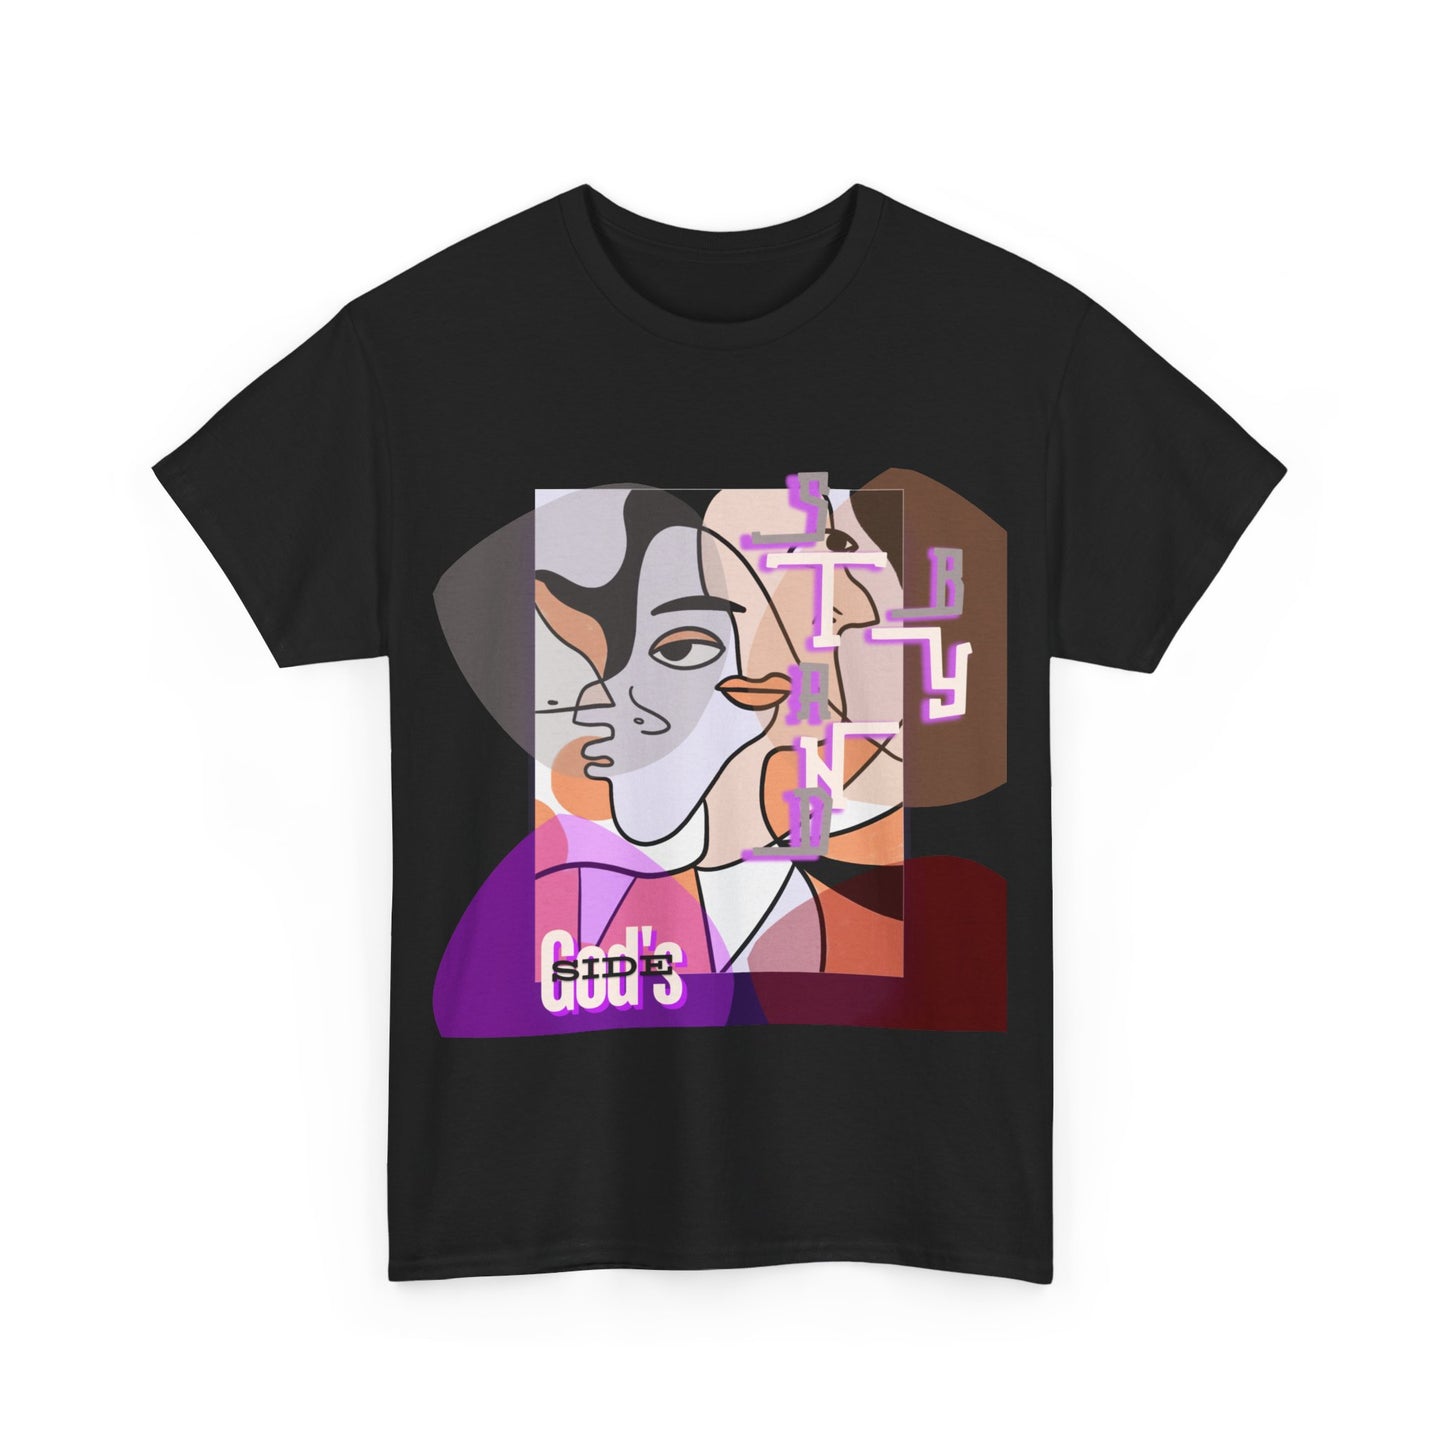 Heavy Cotton Tee with Two Cool Abstract Face Drawings - "Stand by GODS SIDE